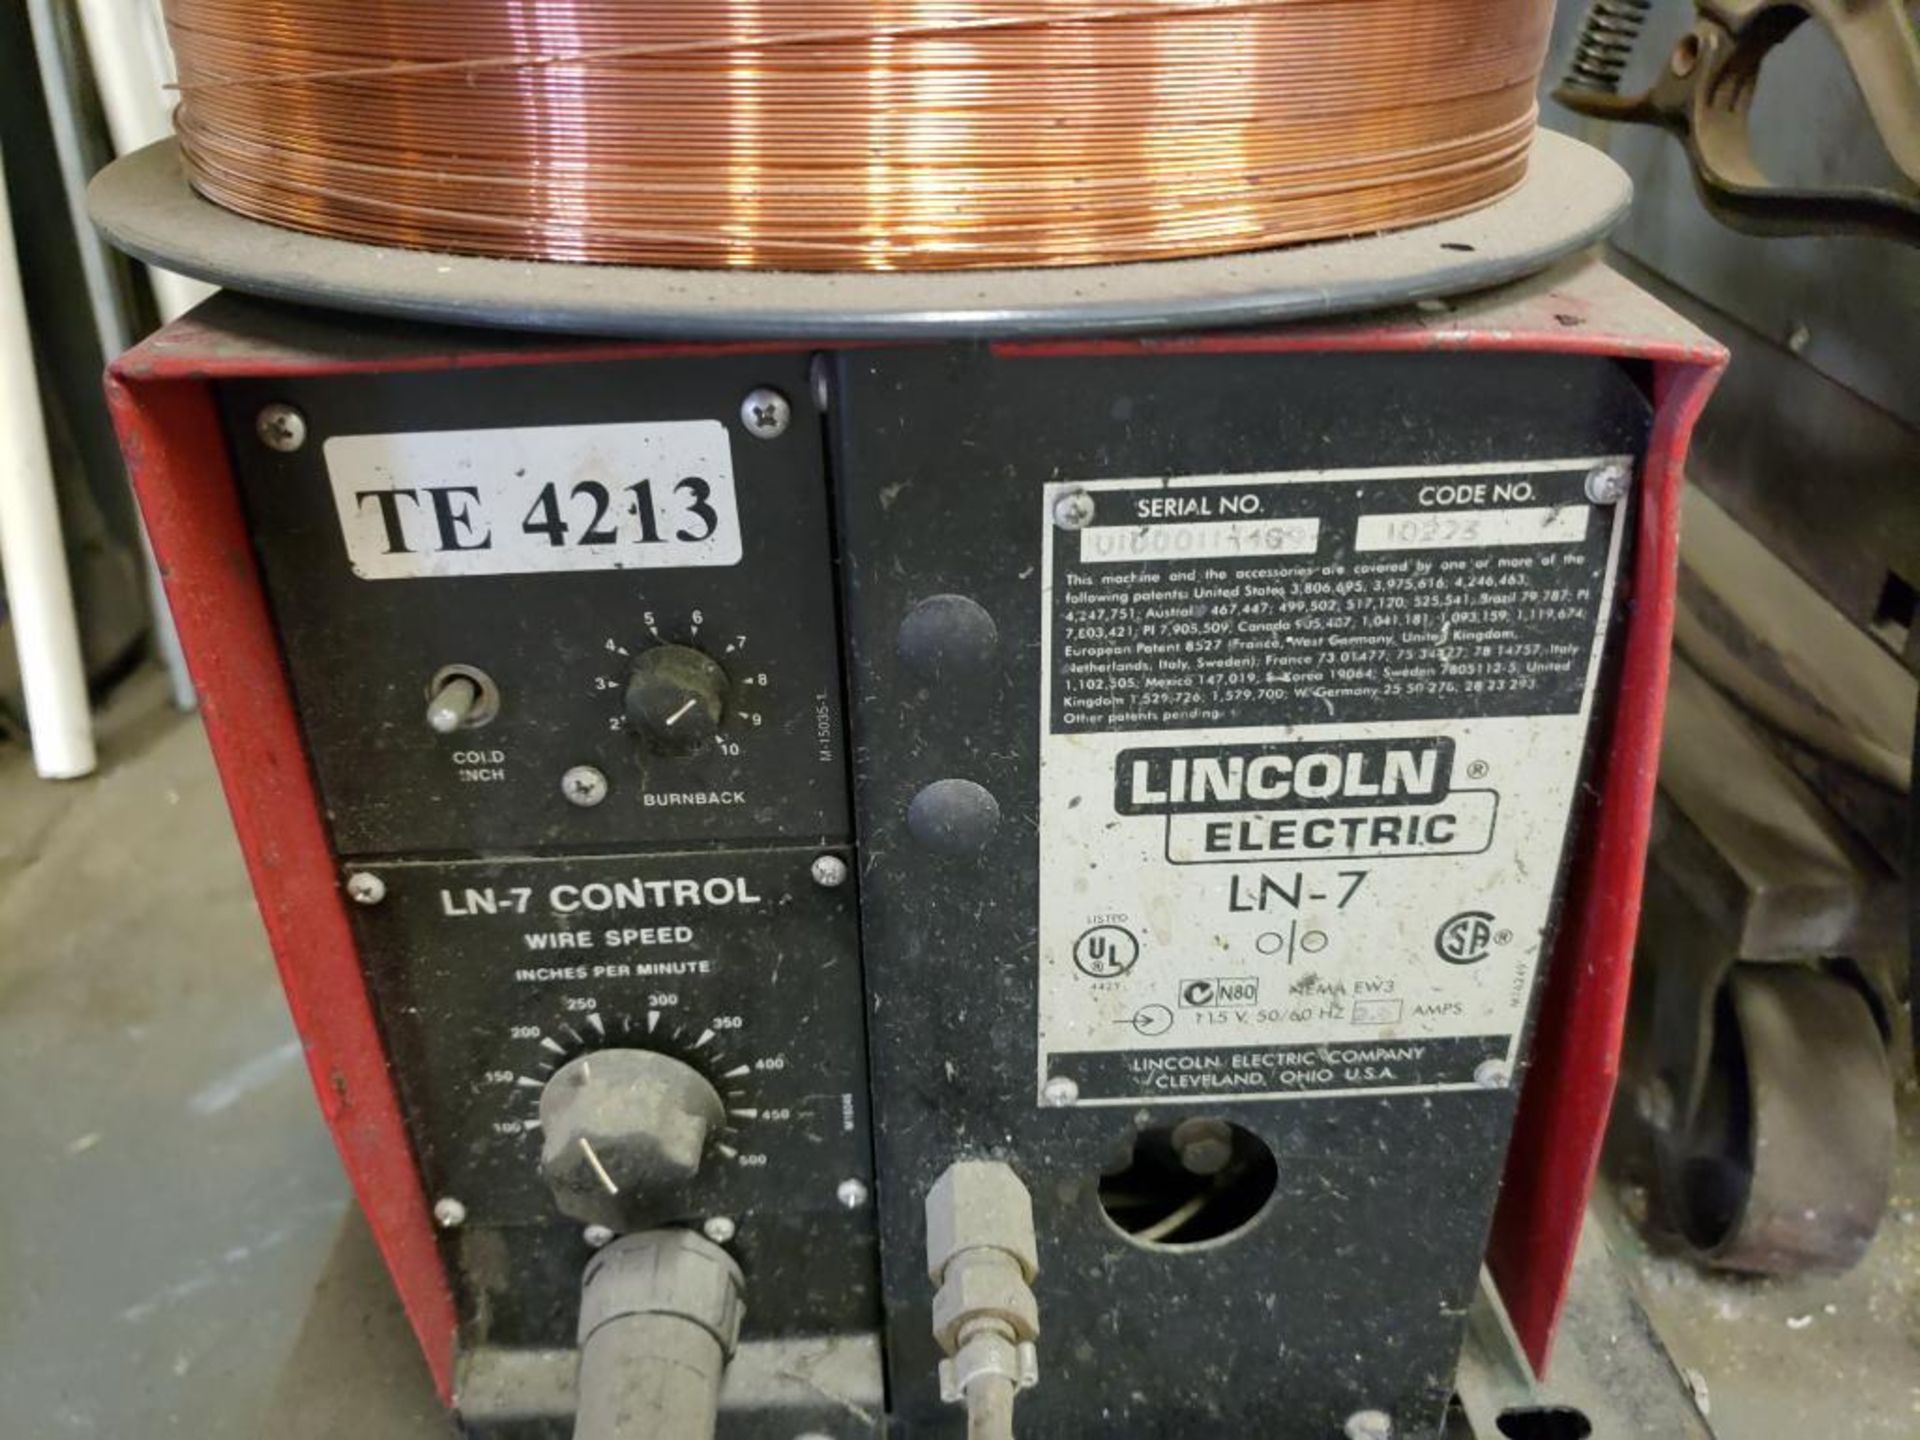 Lincoln Idealarc DC-400 welding power supply with LN-7 wire feed control. - Image 5 of 8